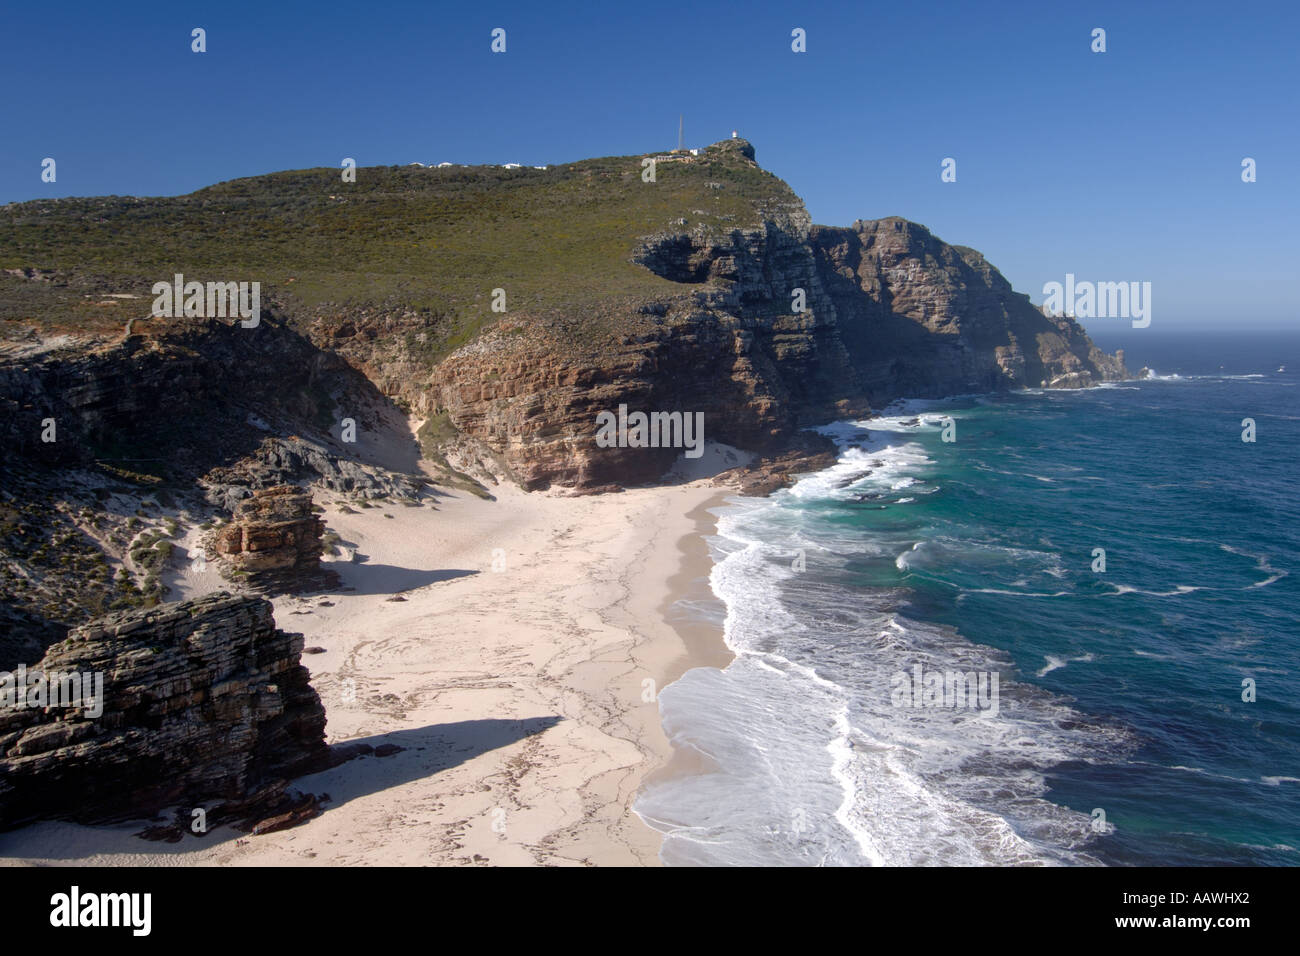 View of Cape Point, Cape Maclear and Diaz Beach in the Cape Point Nature Reserve in South Africa. Stock Photo